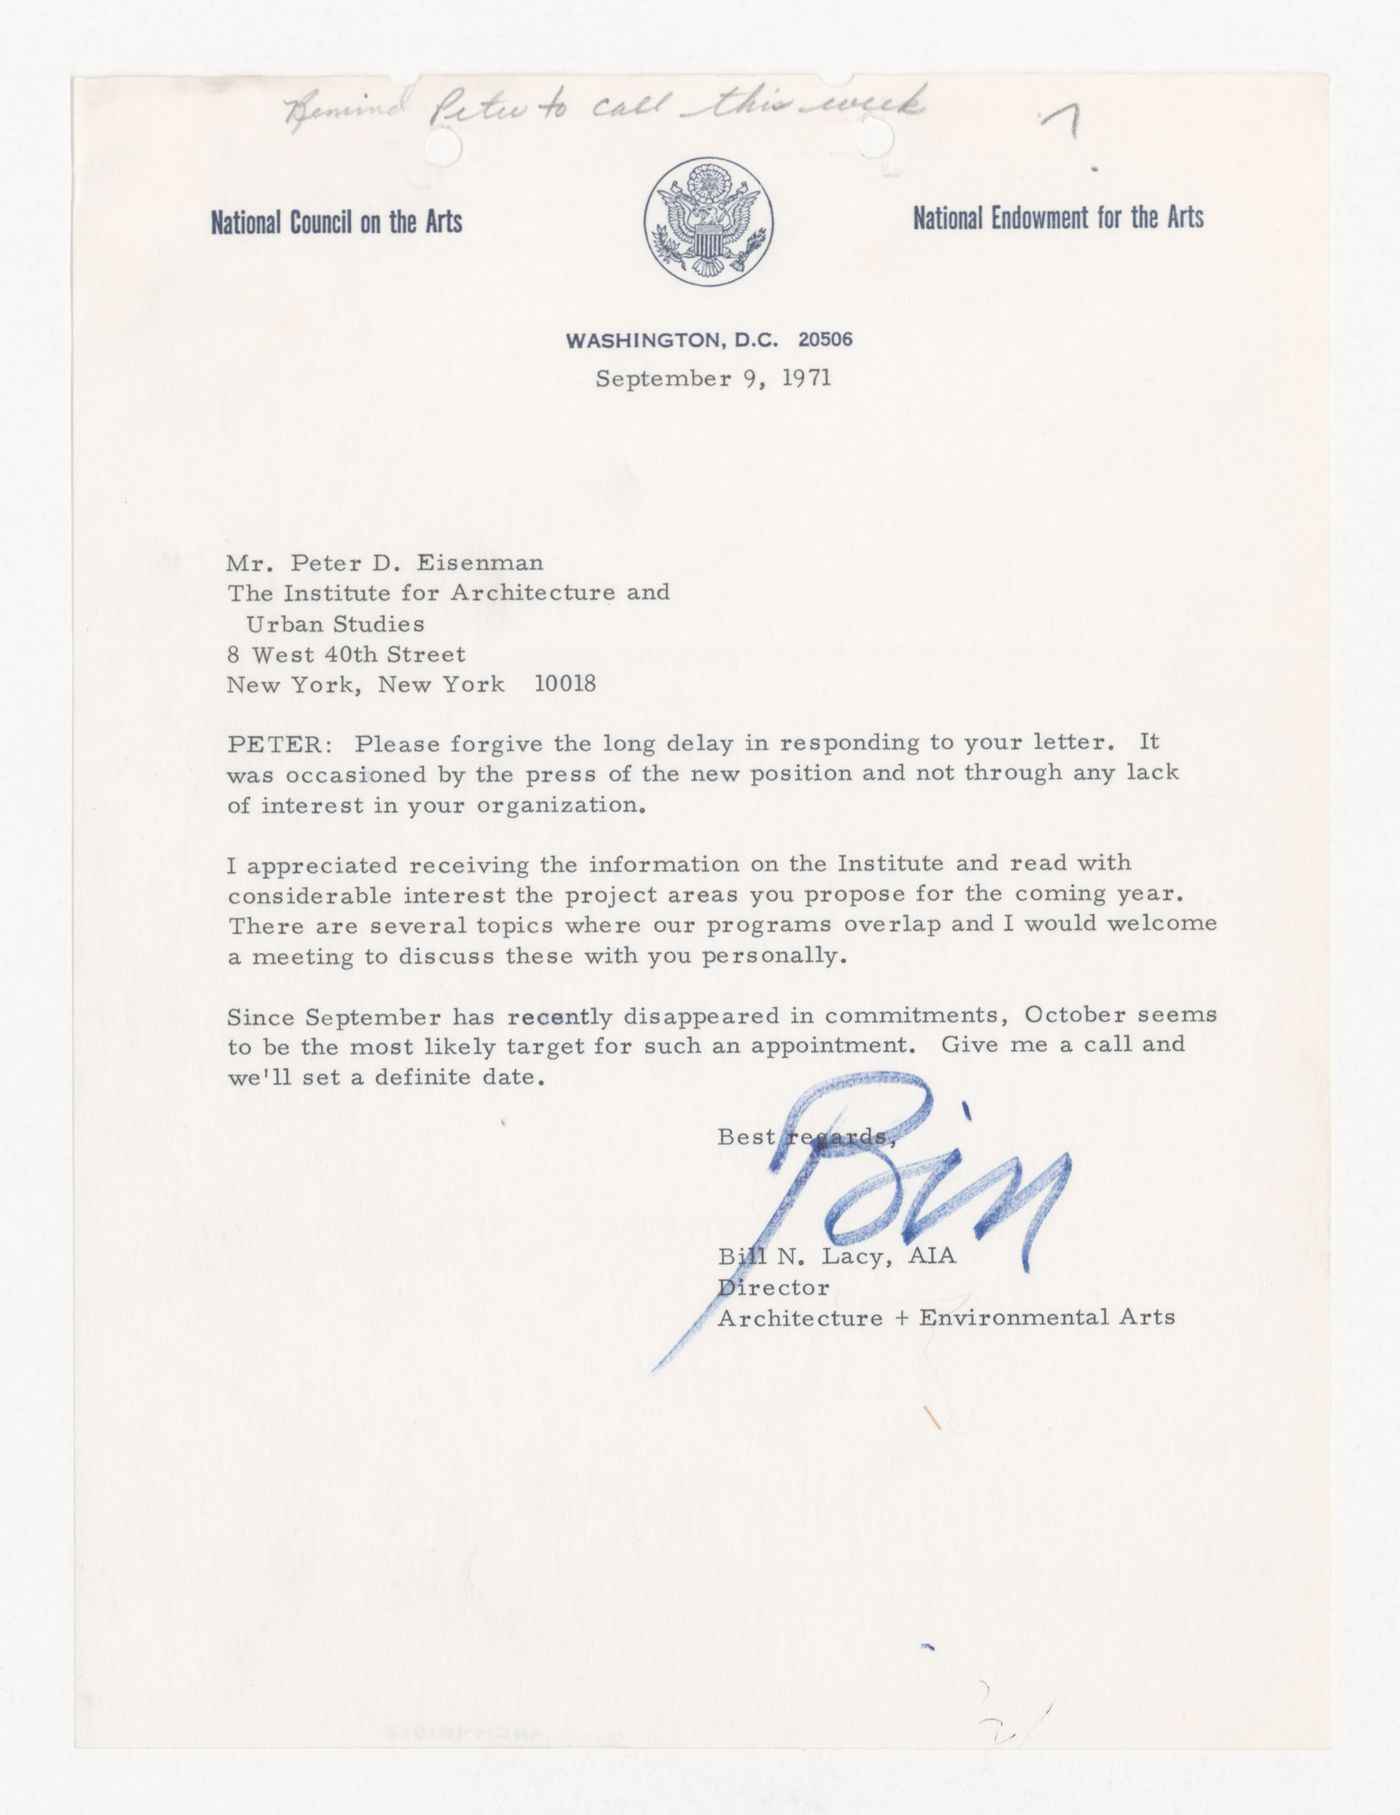 Letter from Bill N. Lacy to Peter D. Eisenman